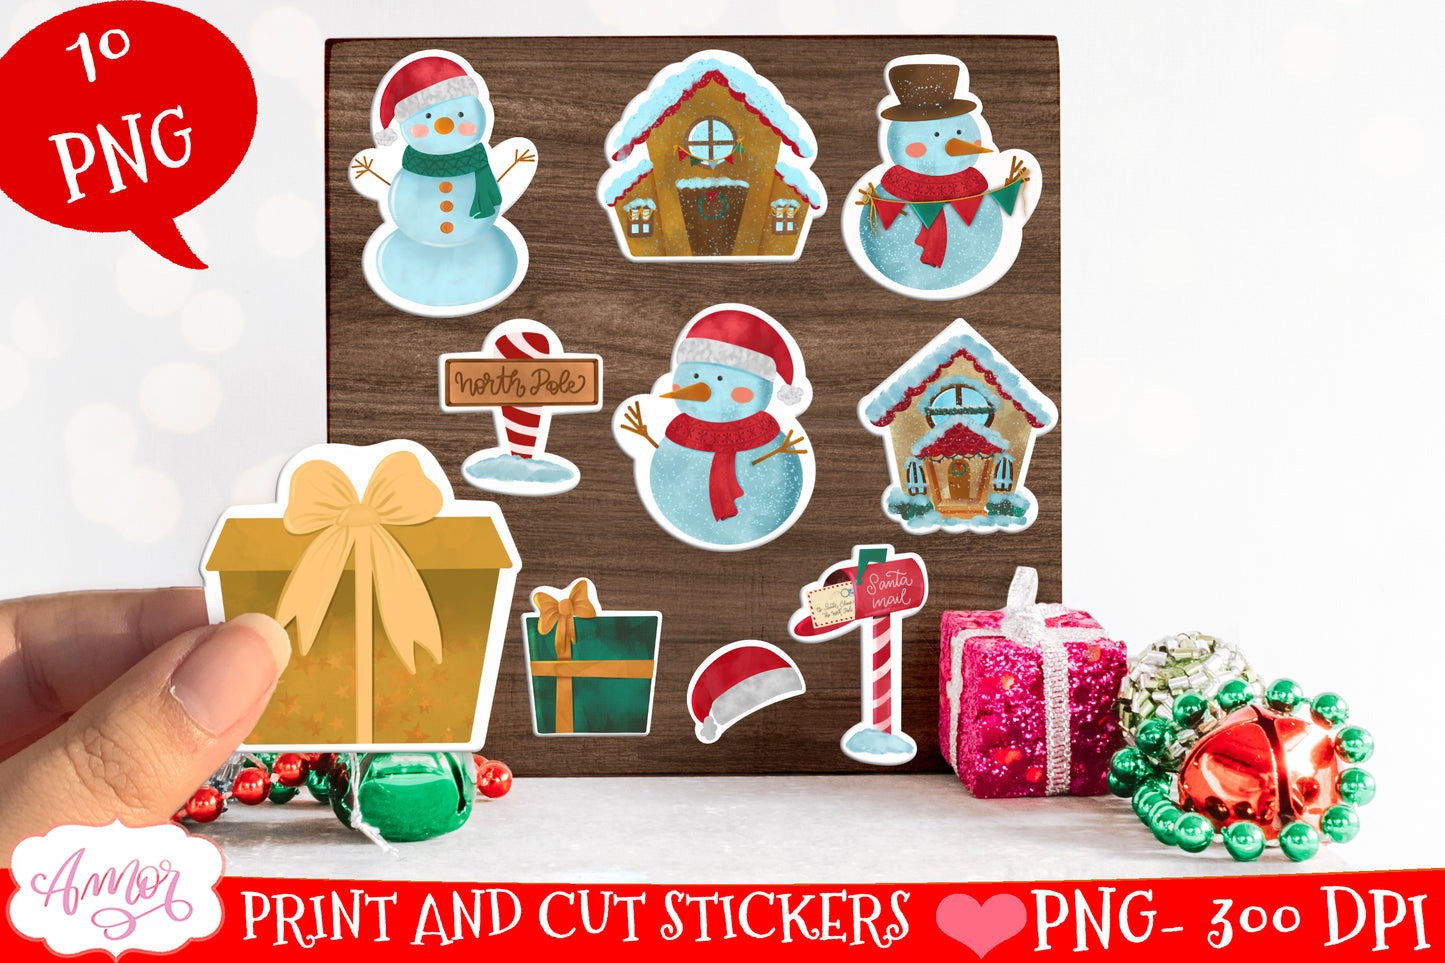 Cute Christmas stickers for print then cut on Cricut, 10 PNG